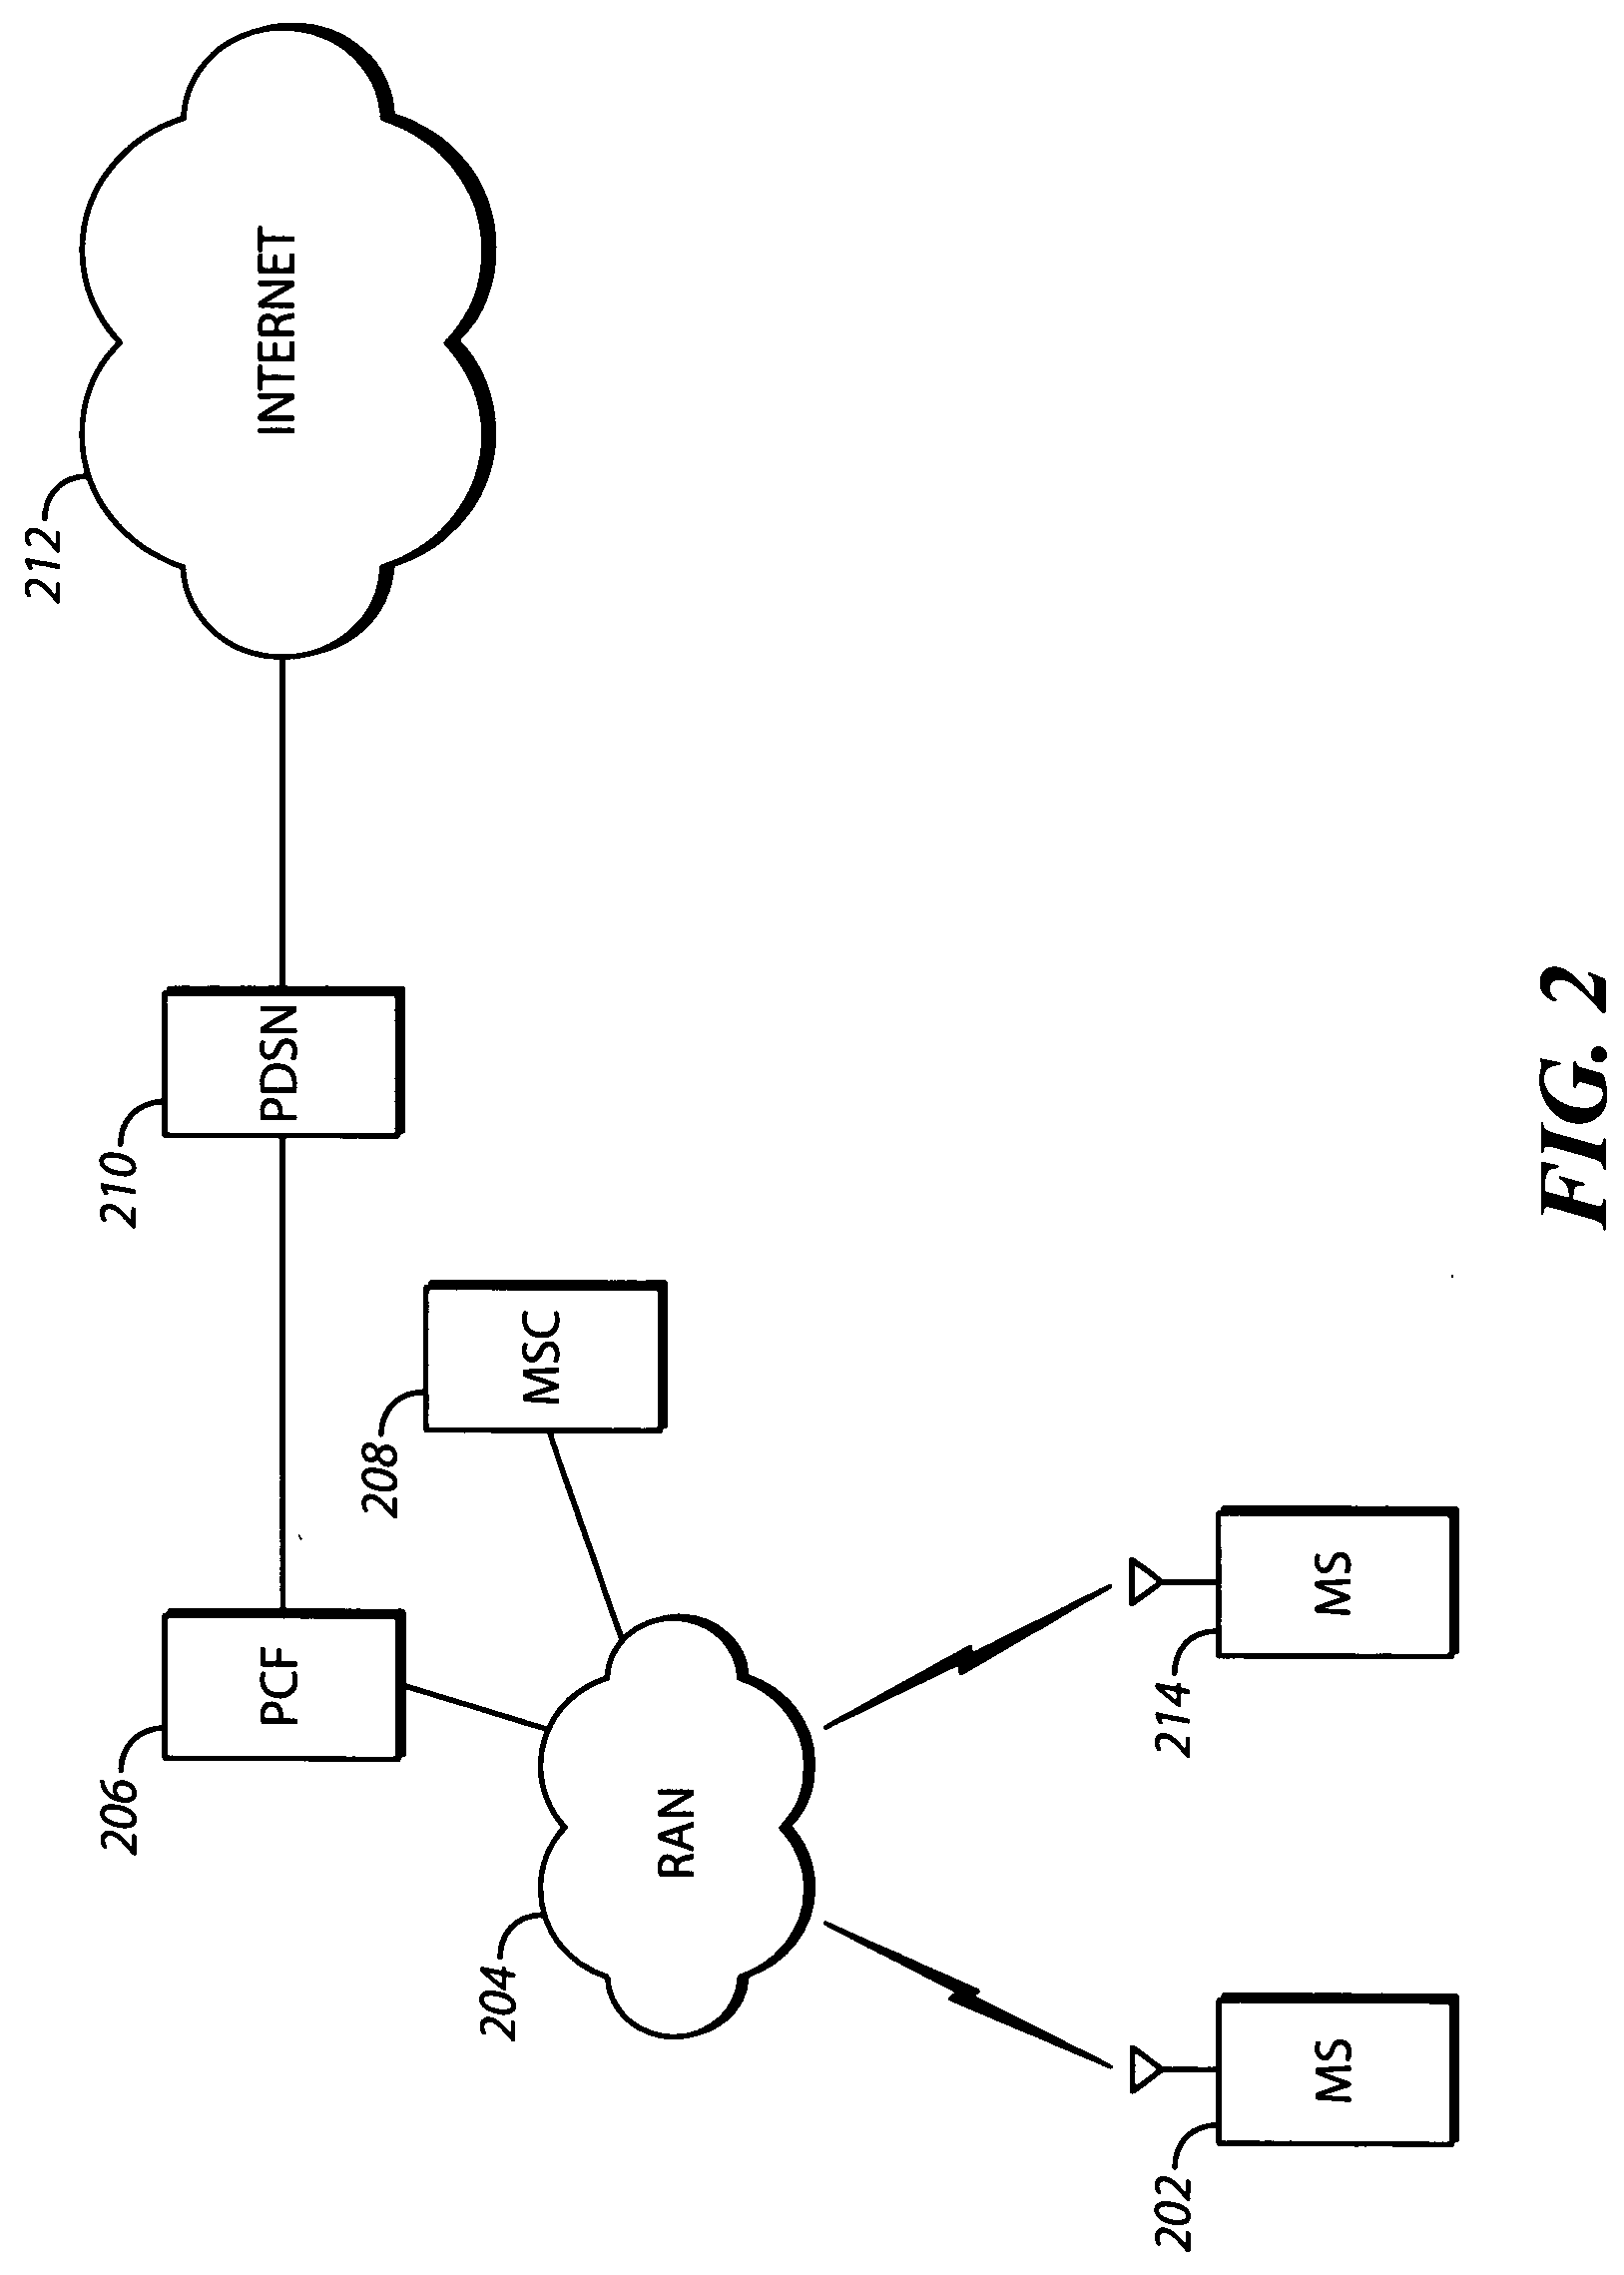 System and method for automatic rerouting of information when a target is busy